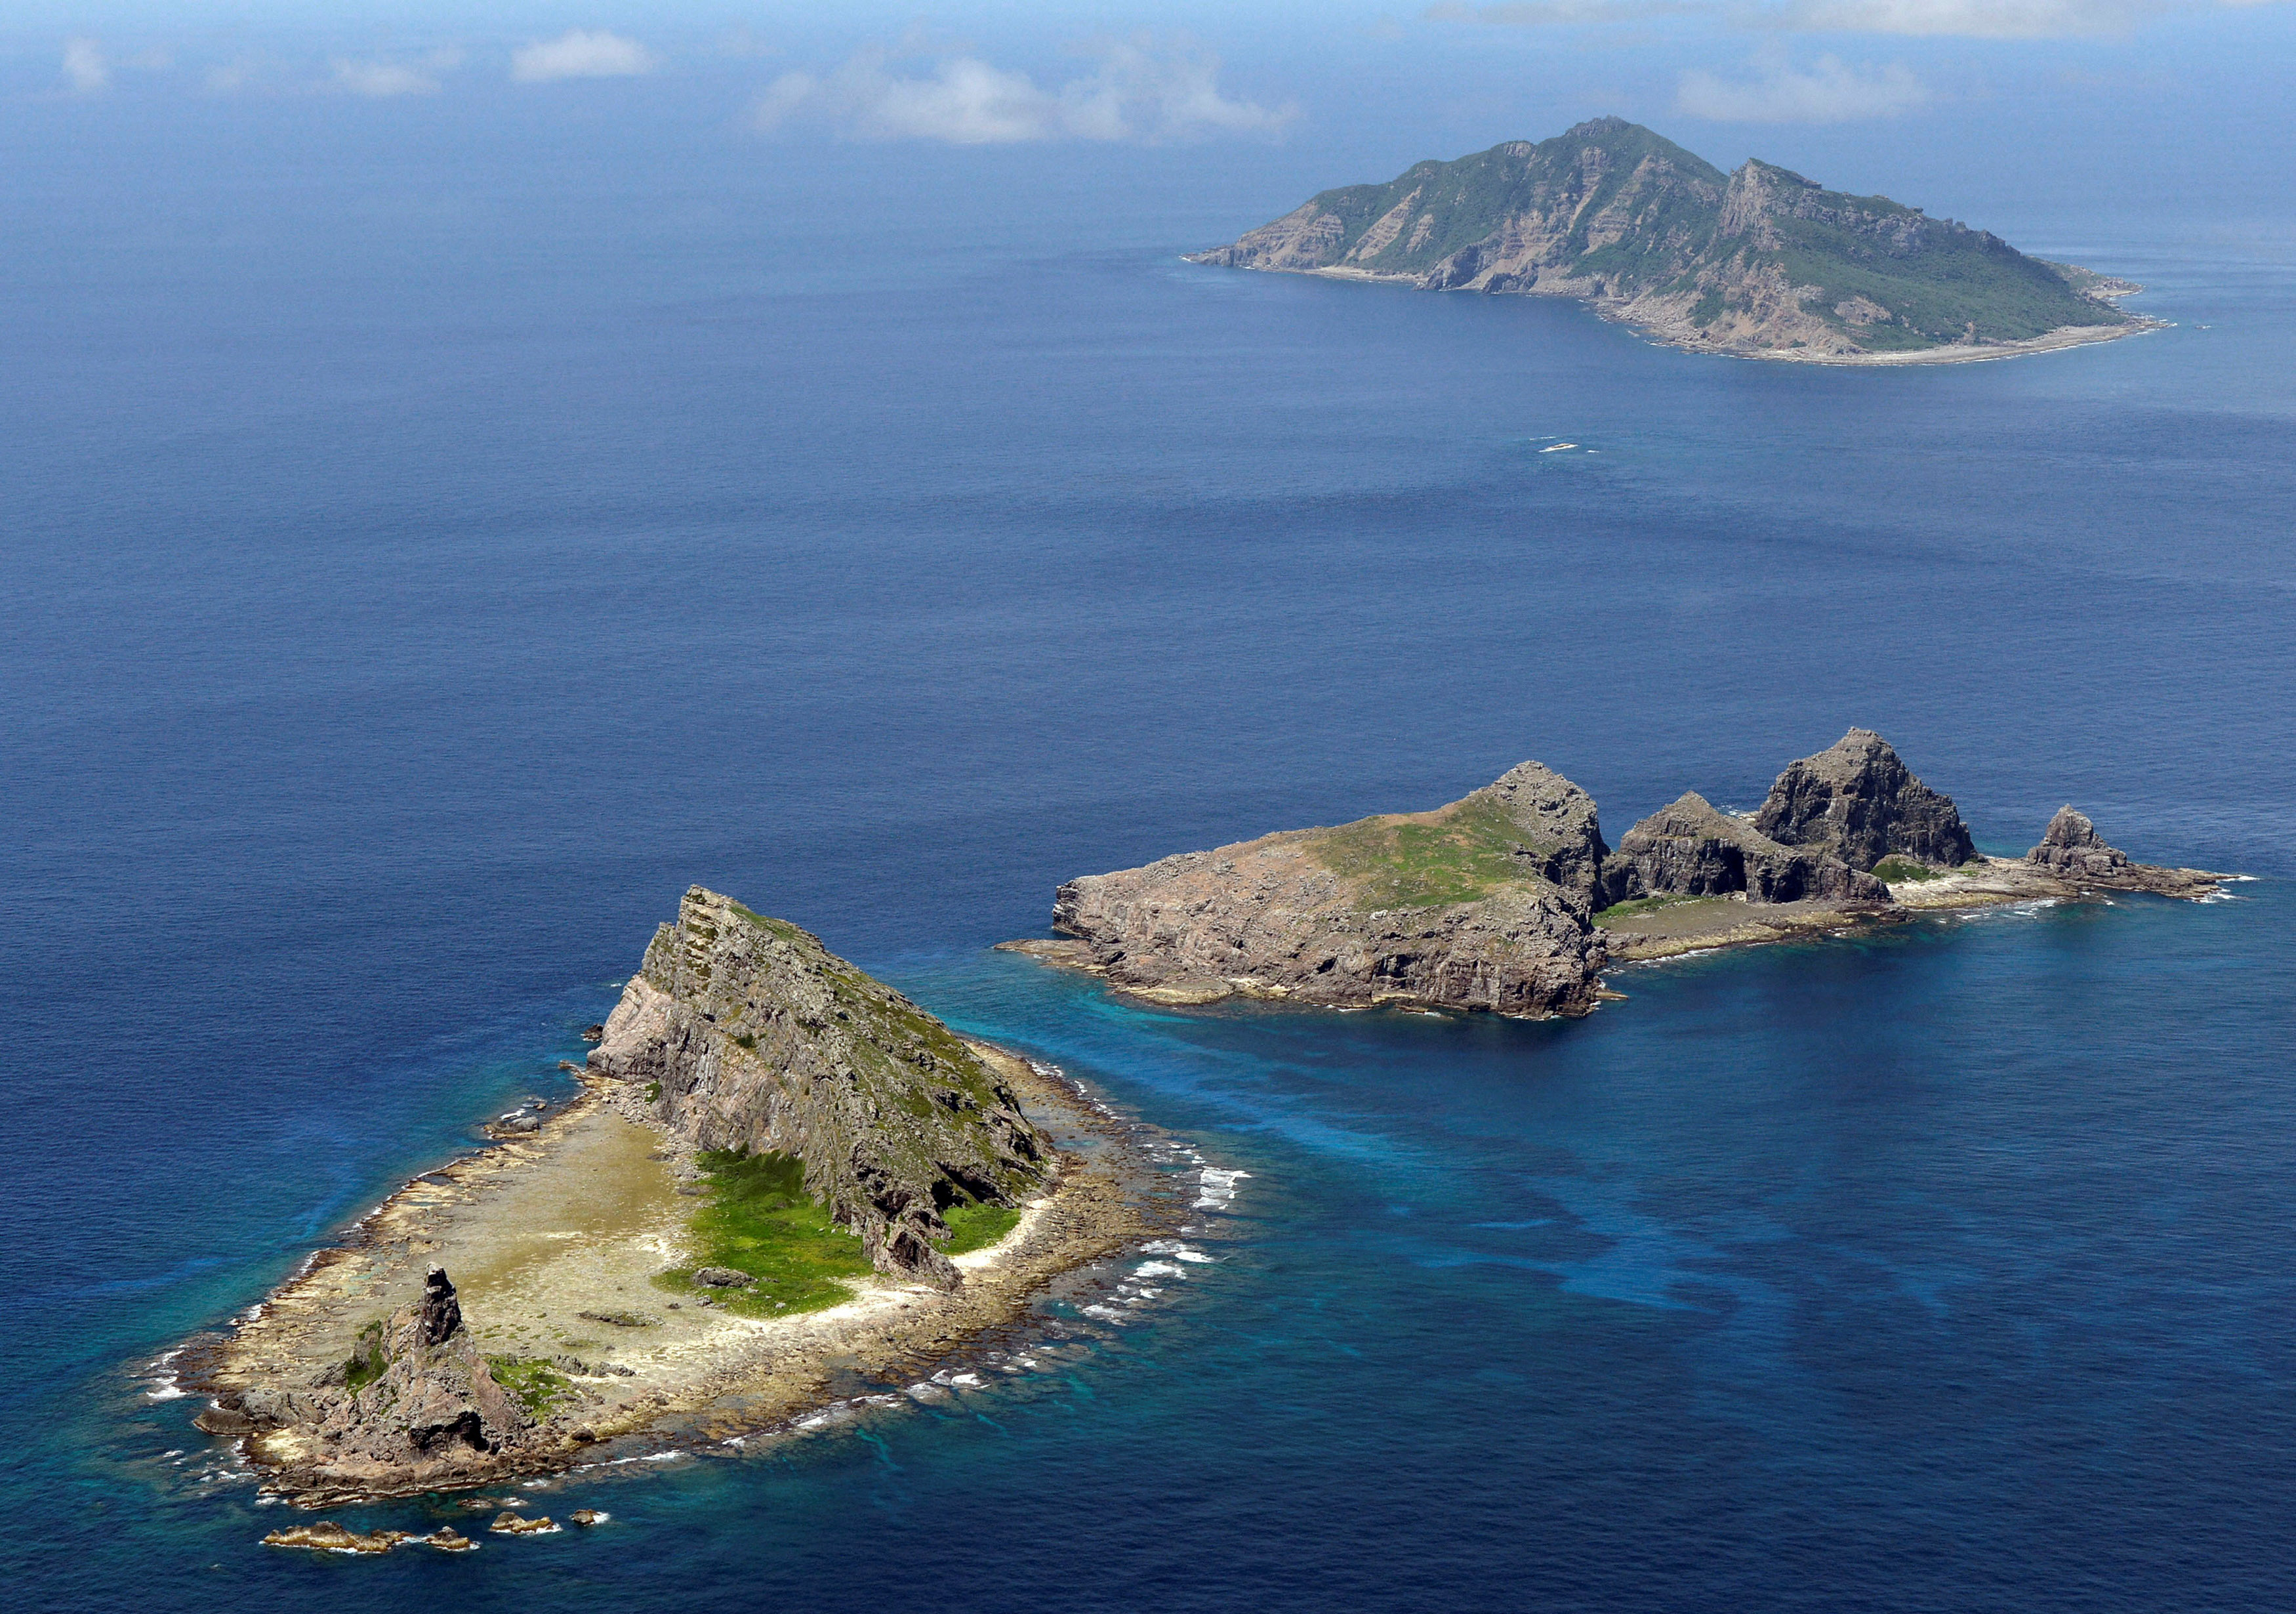 China, Japan trade blame over confrontation near disputed islands